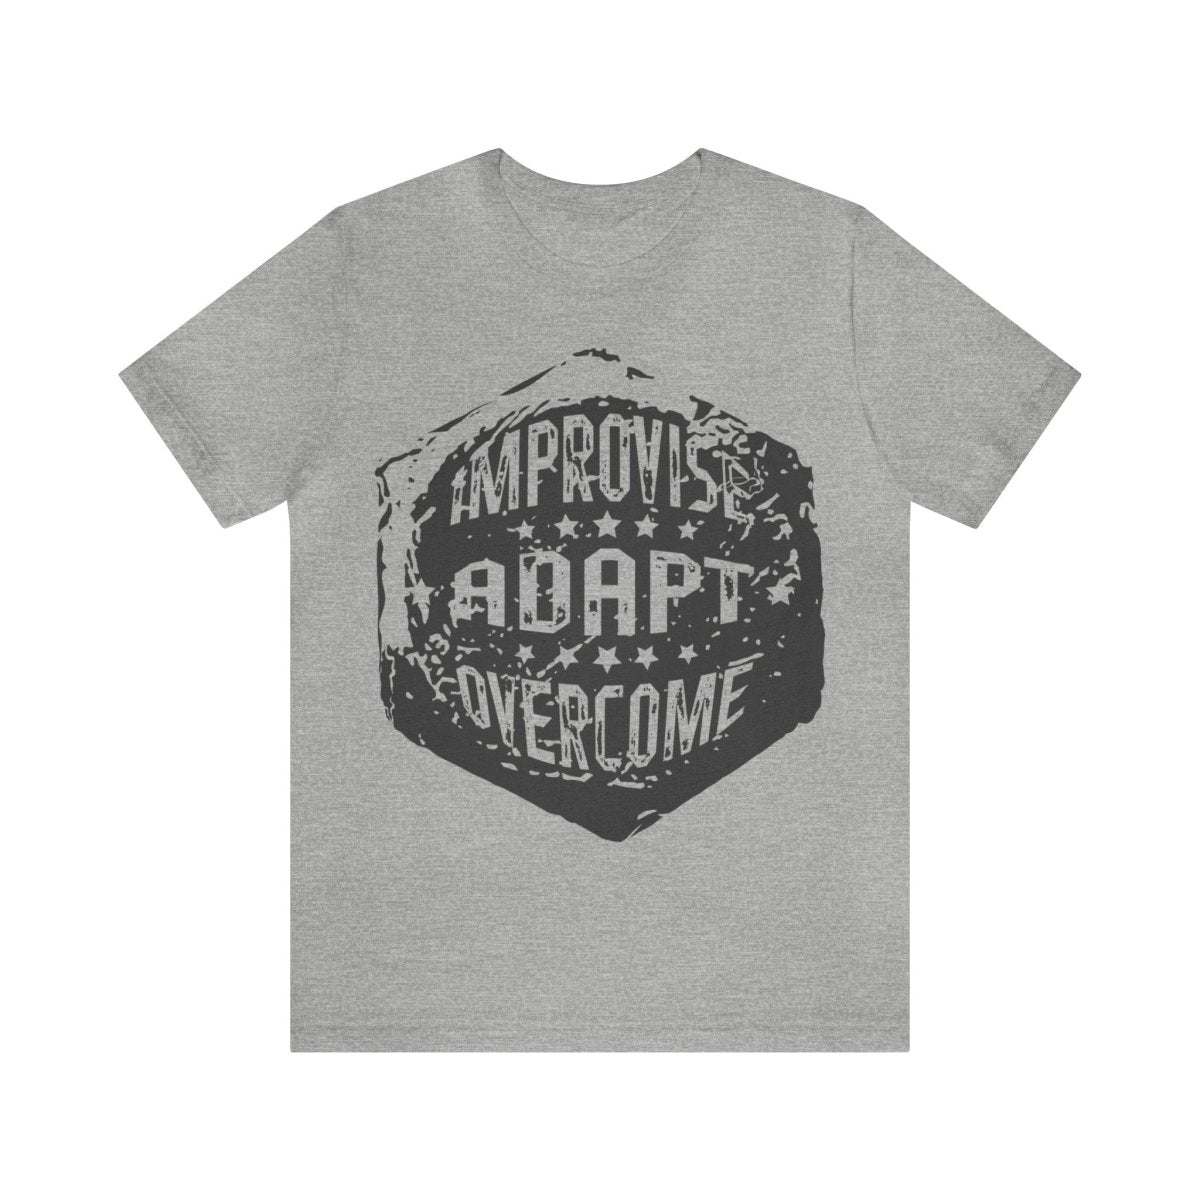 Improvise Adapt Overcome Premium T-Shirt, Leadership Solution, Overcome Obstacles Inspiration